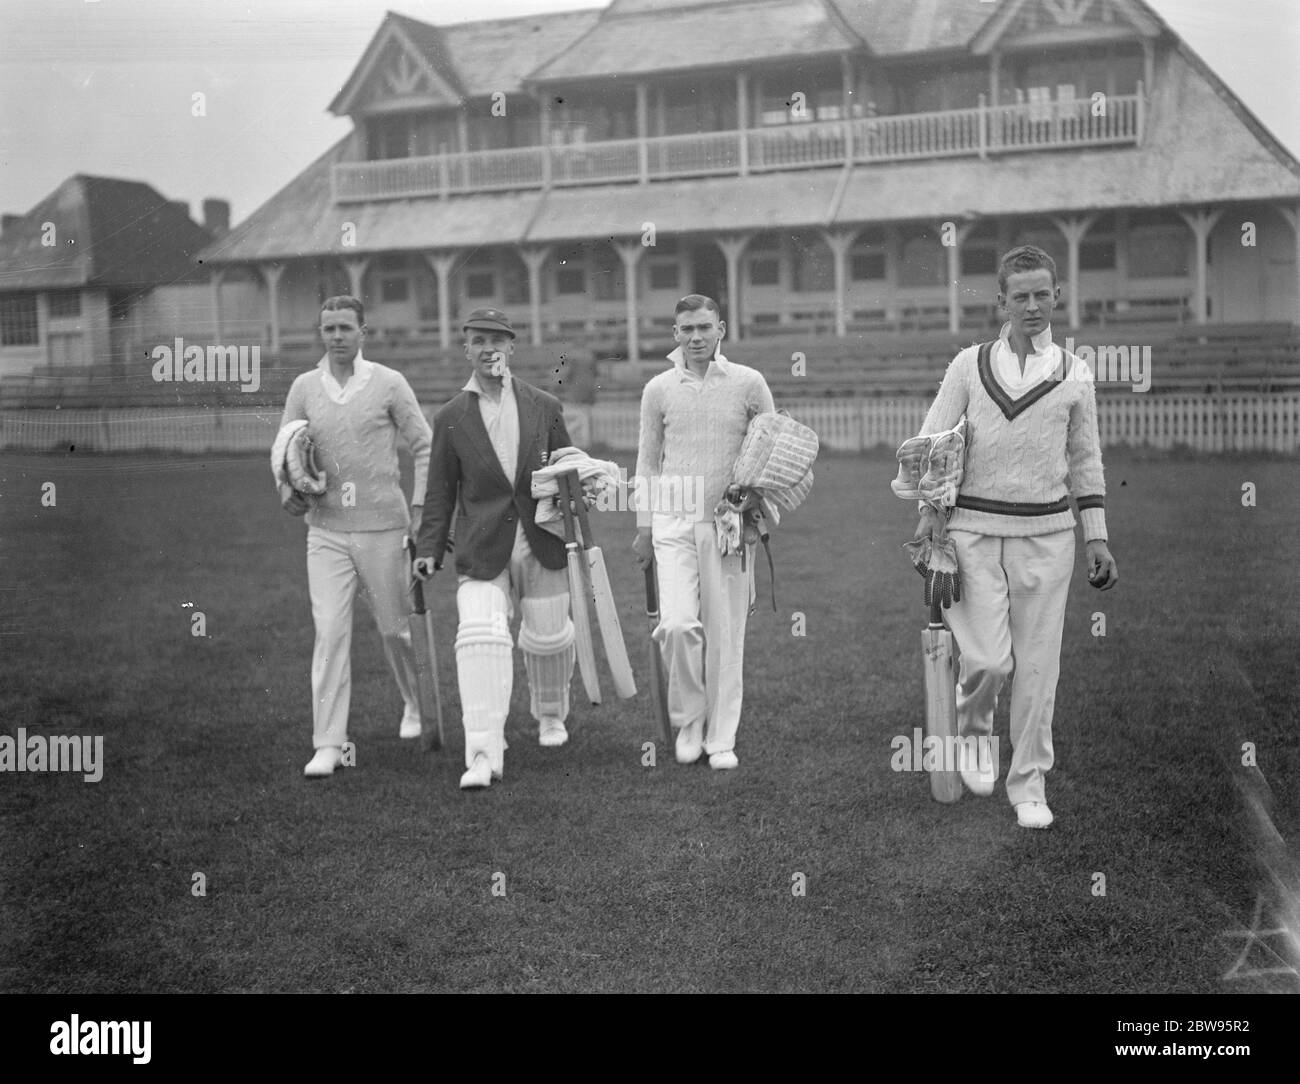 Essex County Cricket Club practice opens at Leyton . The Essex County Cricket Club began their practice for the coming season at Leyton , Essex . Left to right : Taylor , Pepo , Evans and Wade going out for the first practice of the season at Leyton . 25 April 1932 Stock Photo